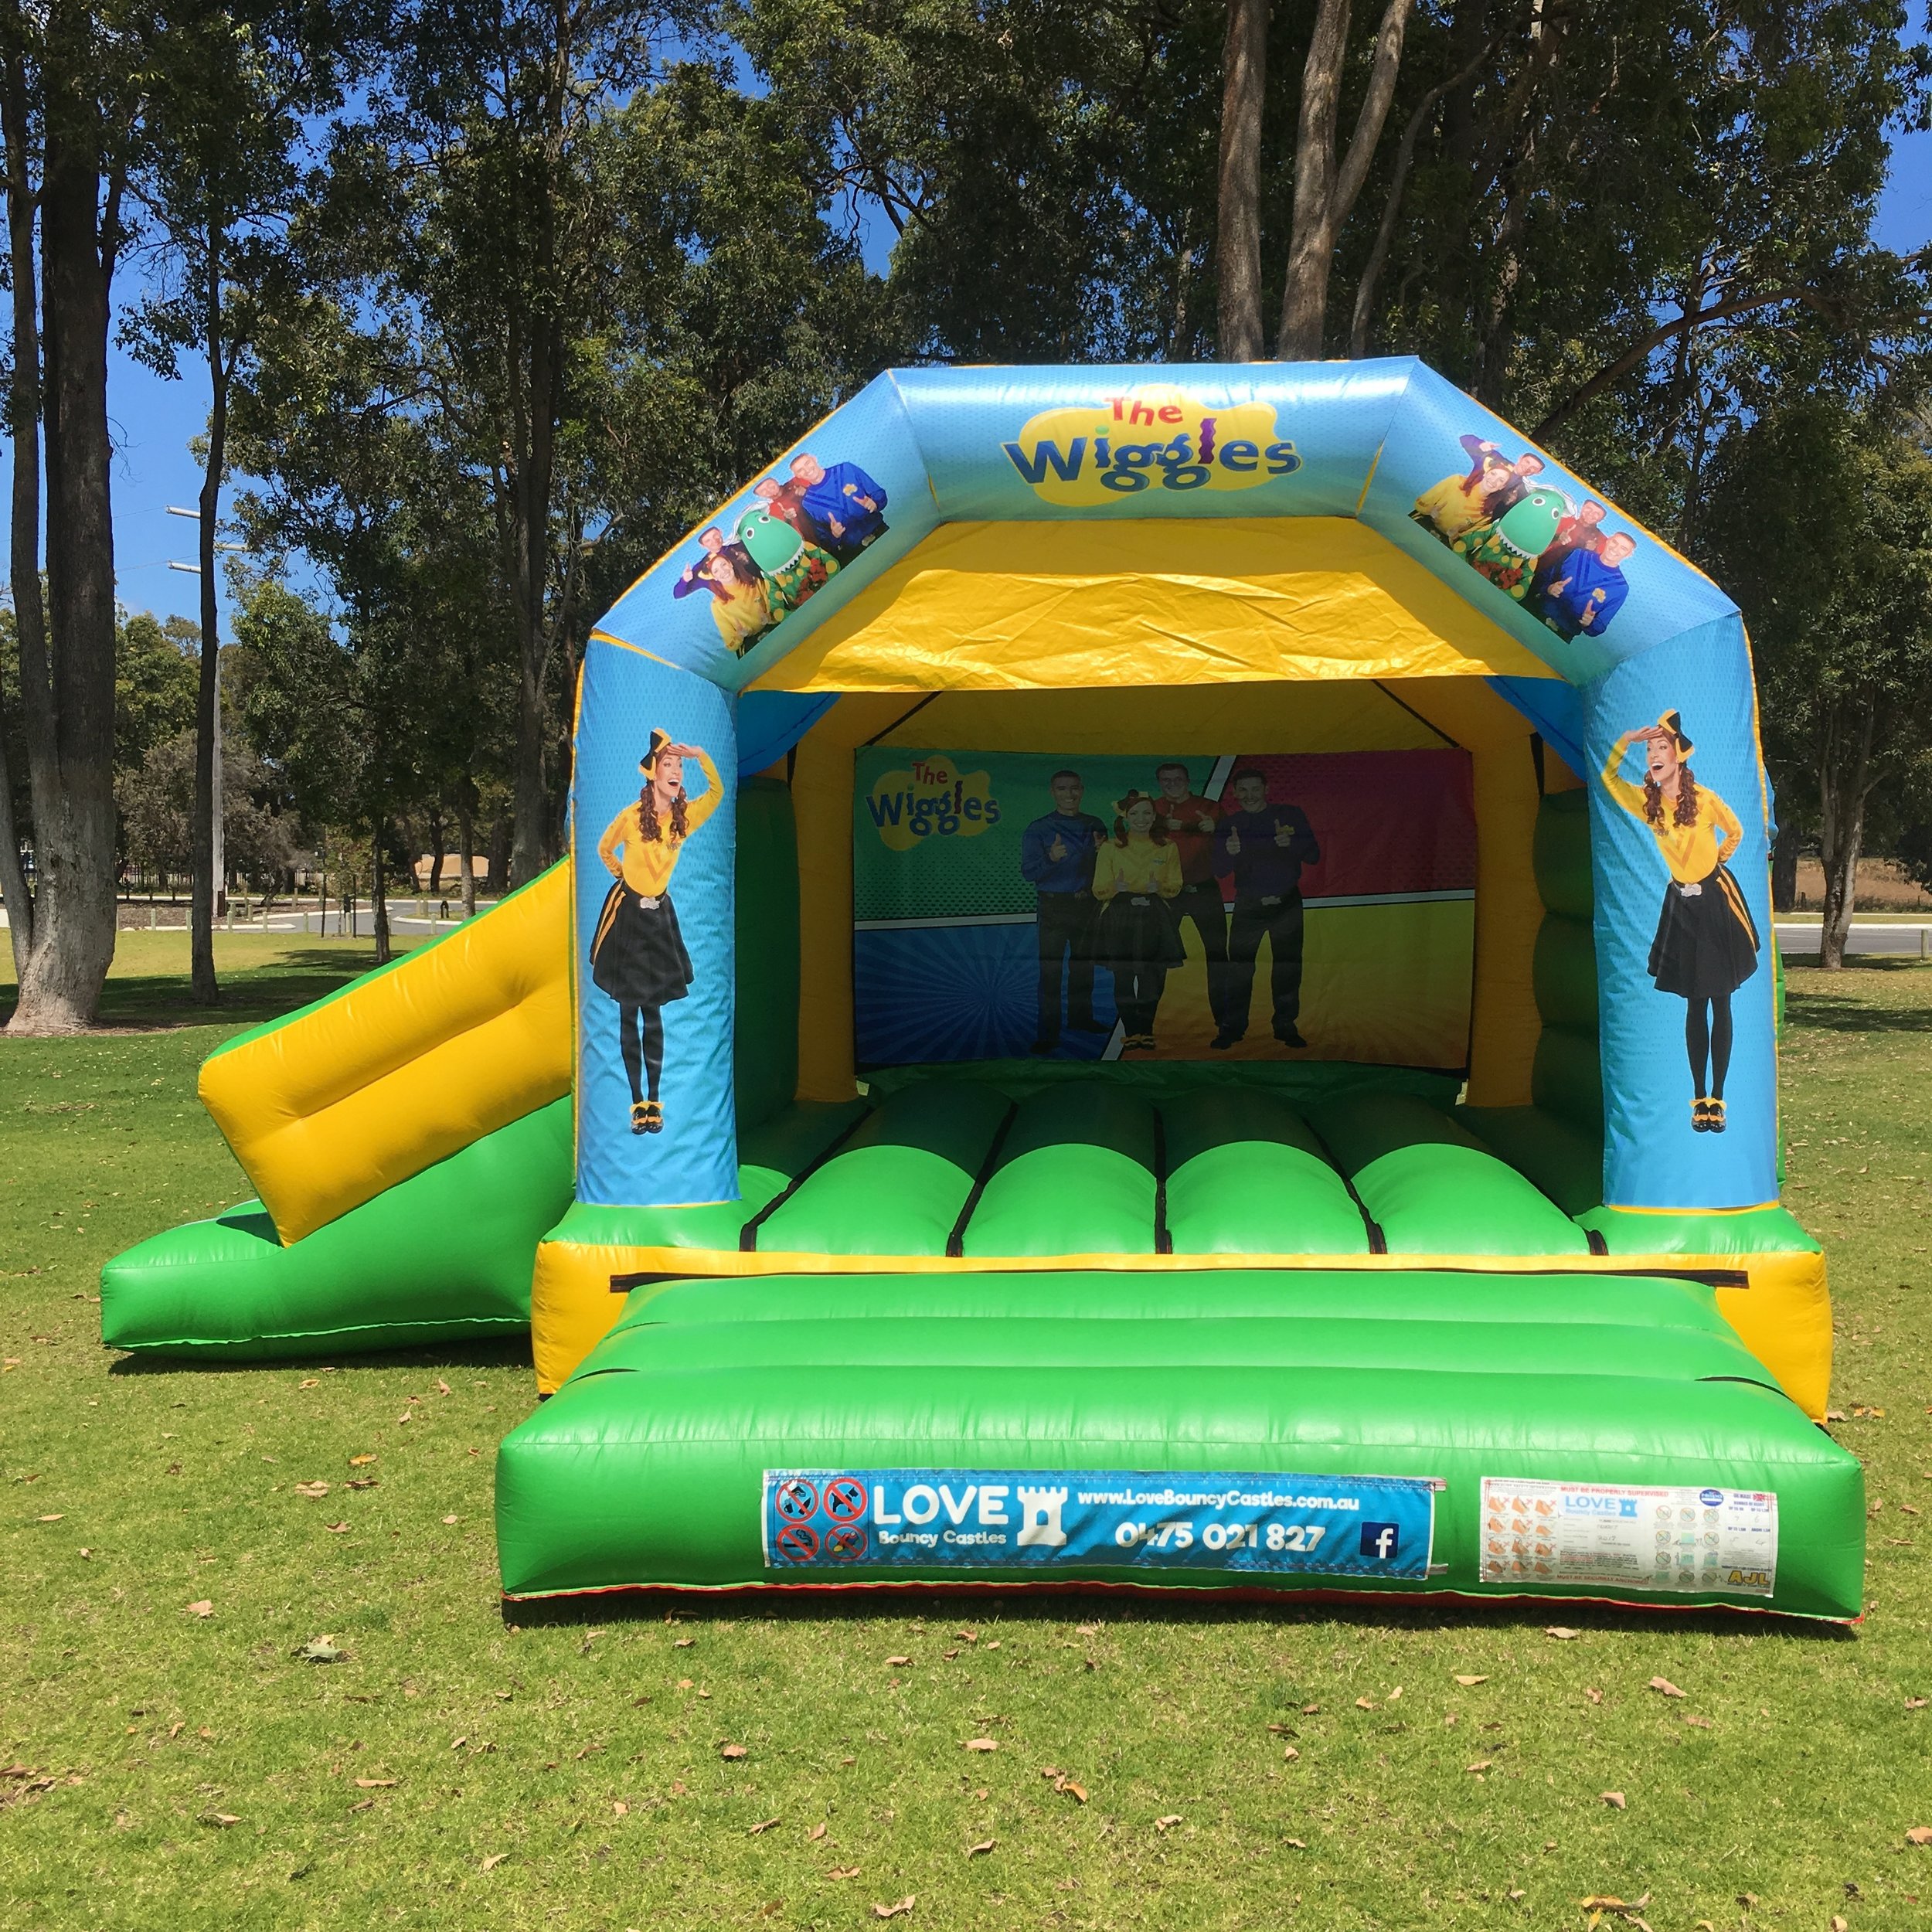 Wiggles Bouncy Castle With Slide In Perth